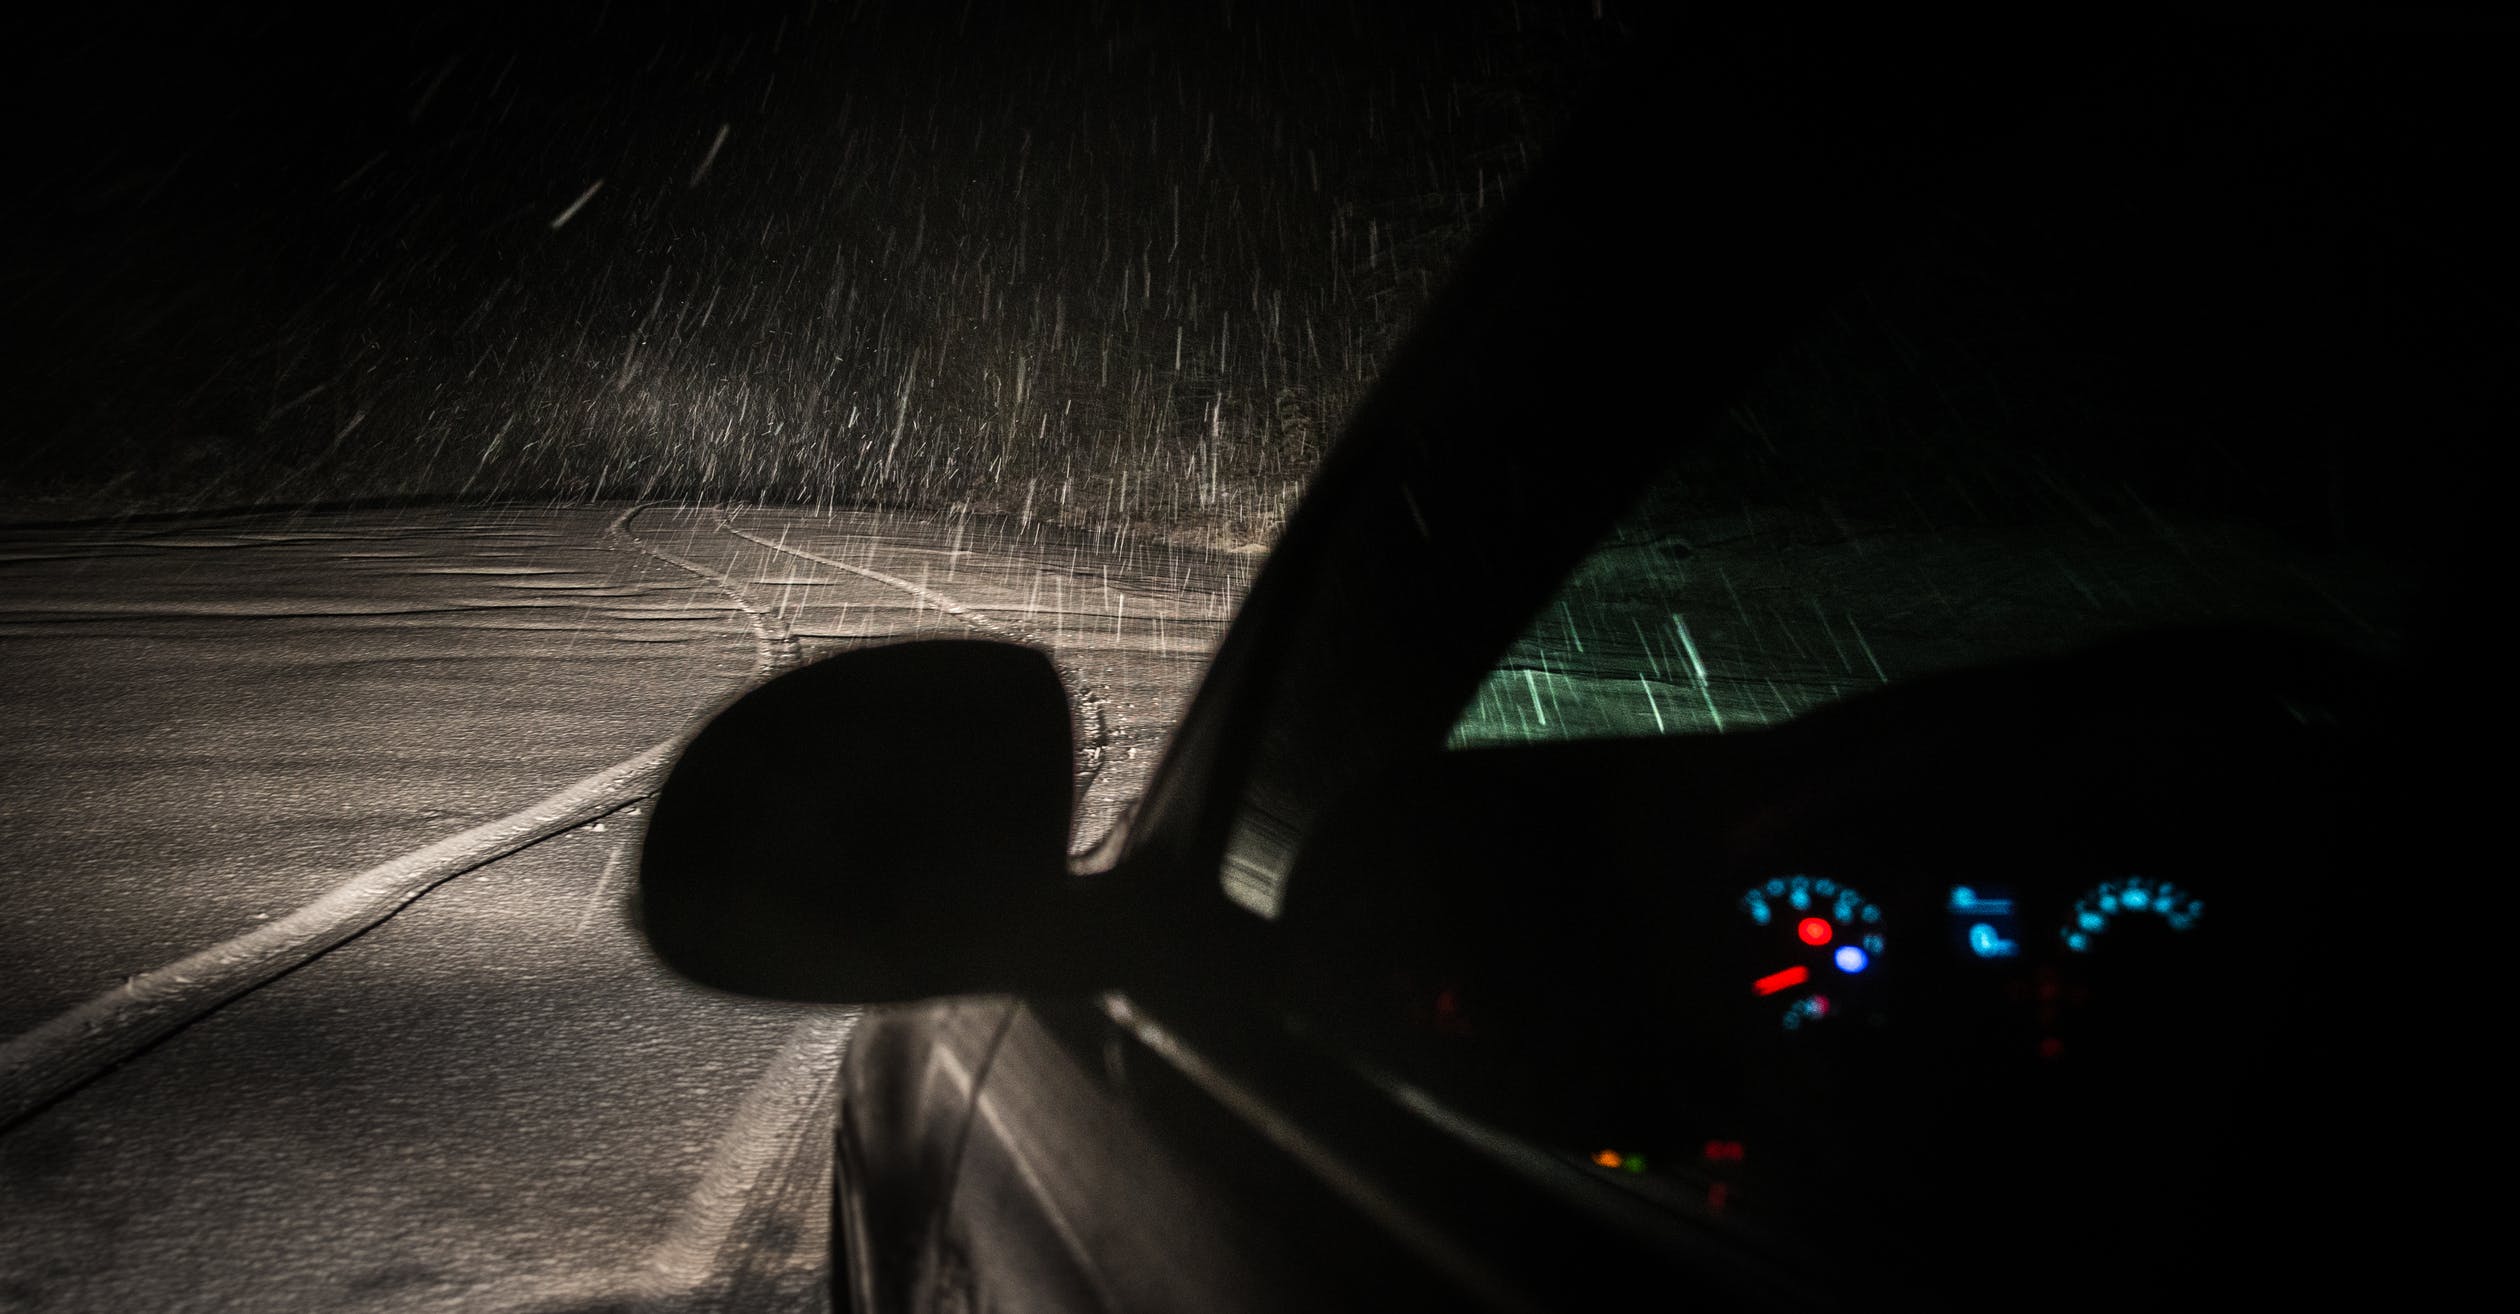 Changing Seasons Signal Time to Check the Health of Your Vehicle’s Headlights